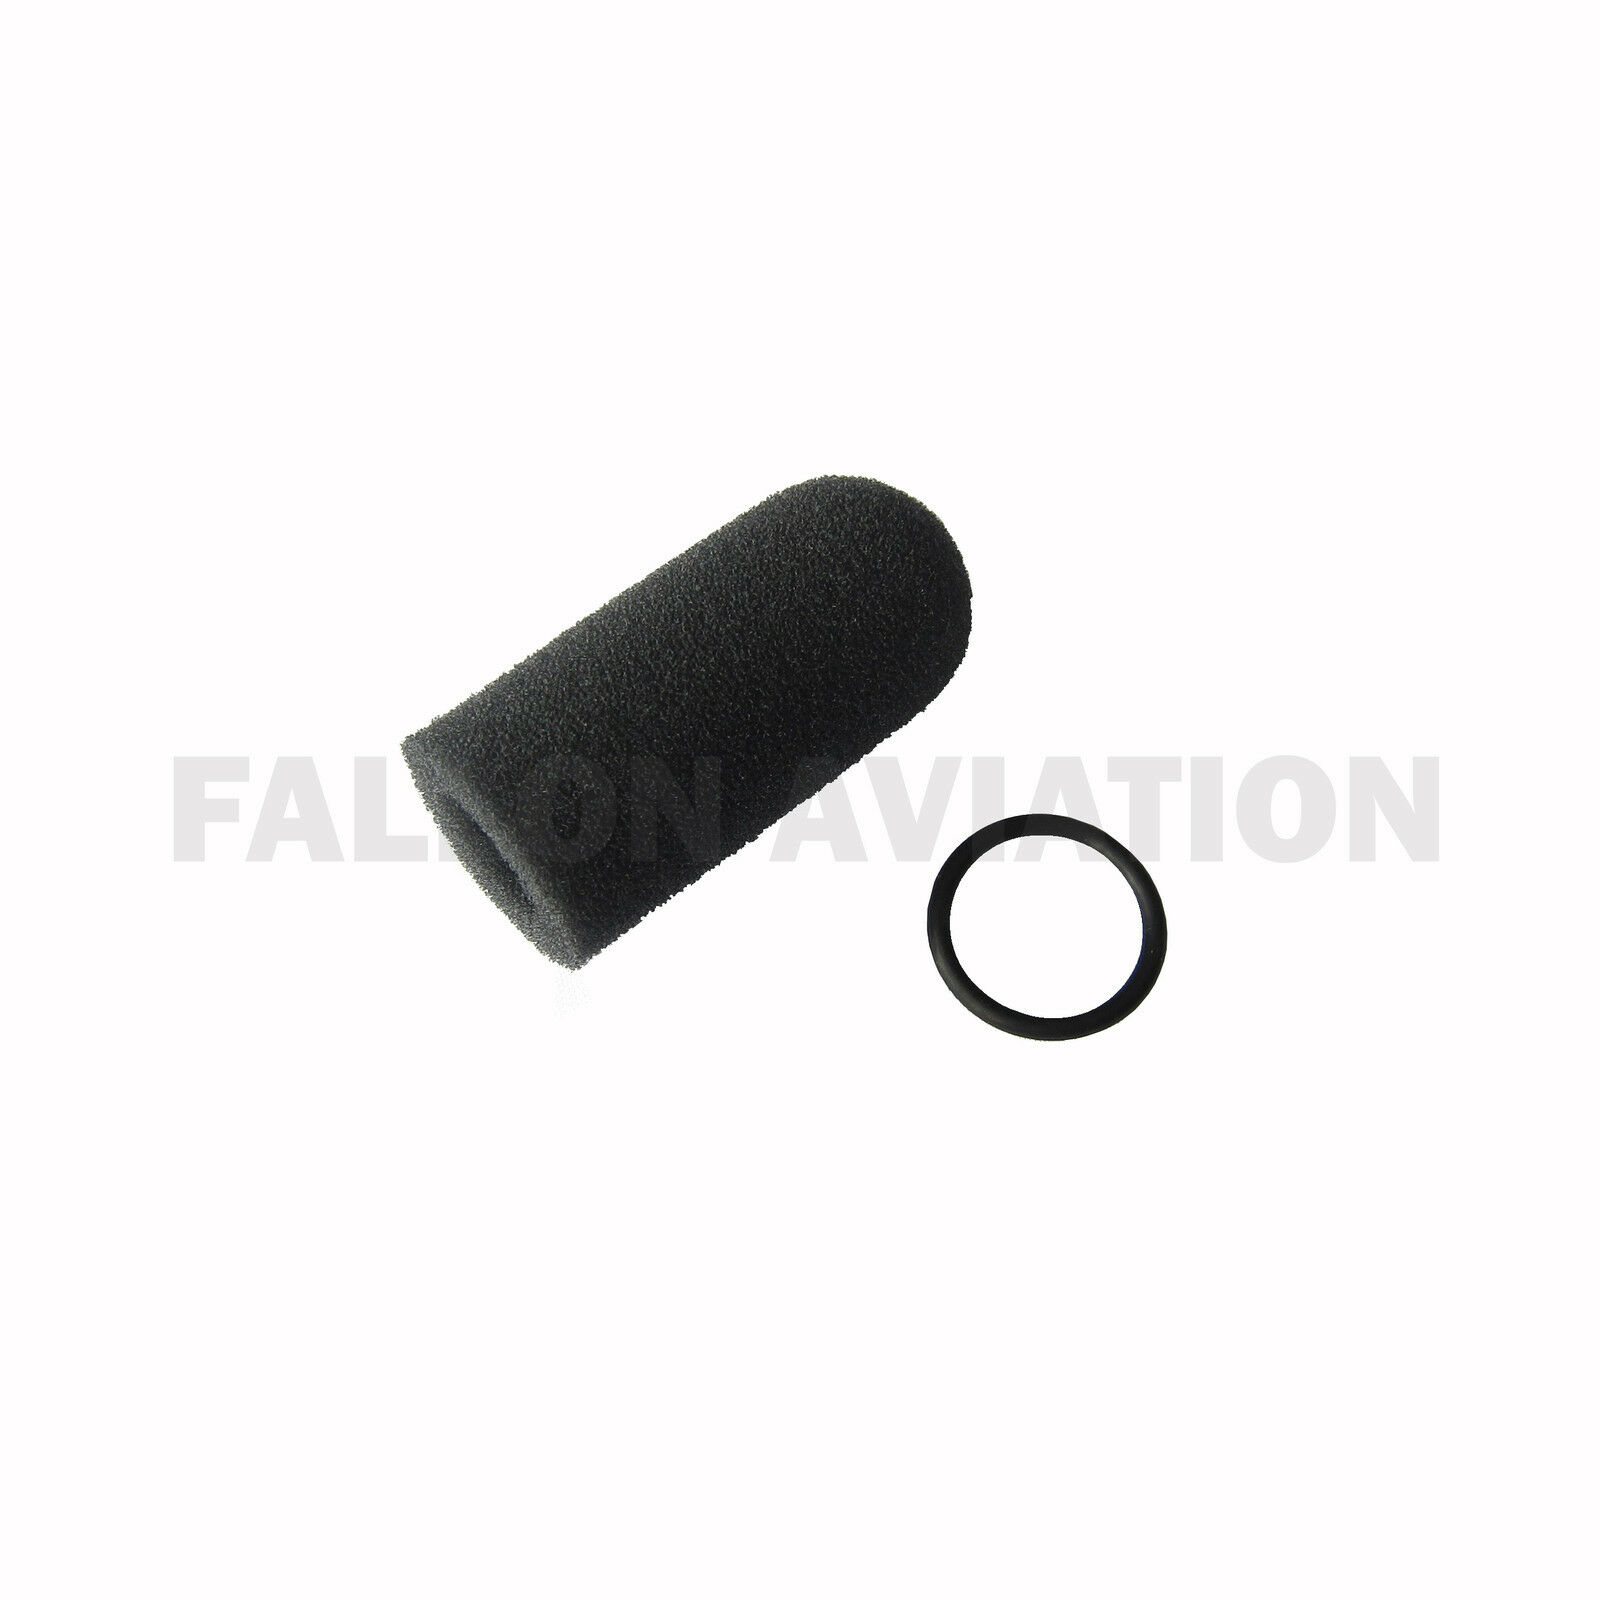 David Clark Mic Muff  M-7a Microphone Protector - Authorized Dealer - 40062g-02